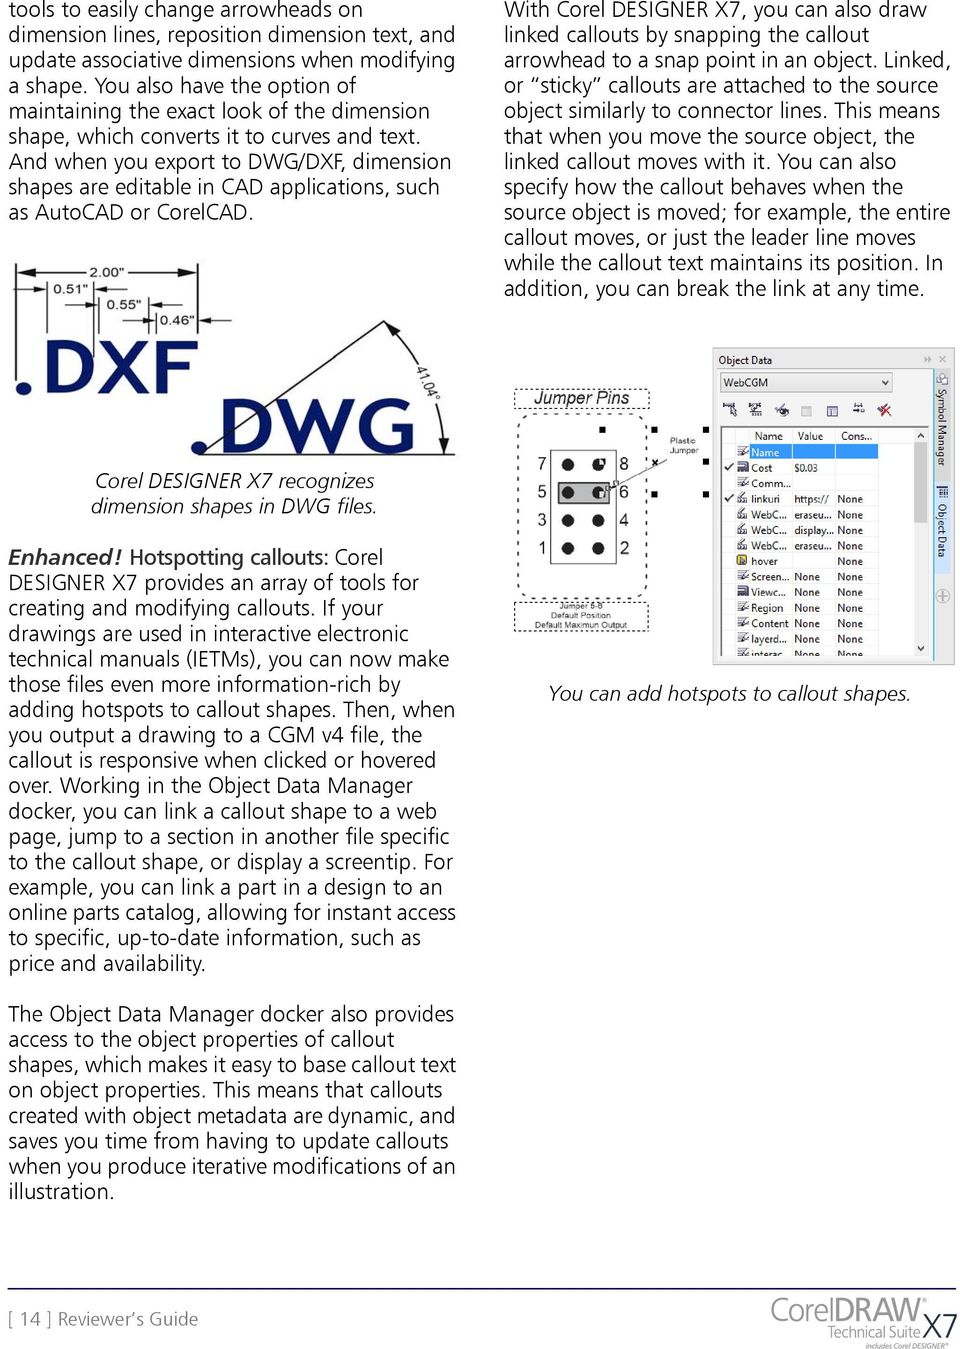 And when you export to DWG/DXF, dimension shapes are editable in CAD applications, such as AutoCAD or CorelCAD.